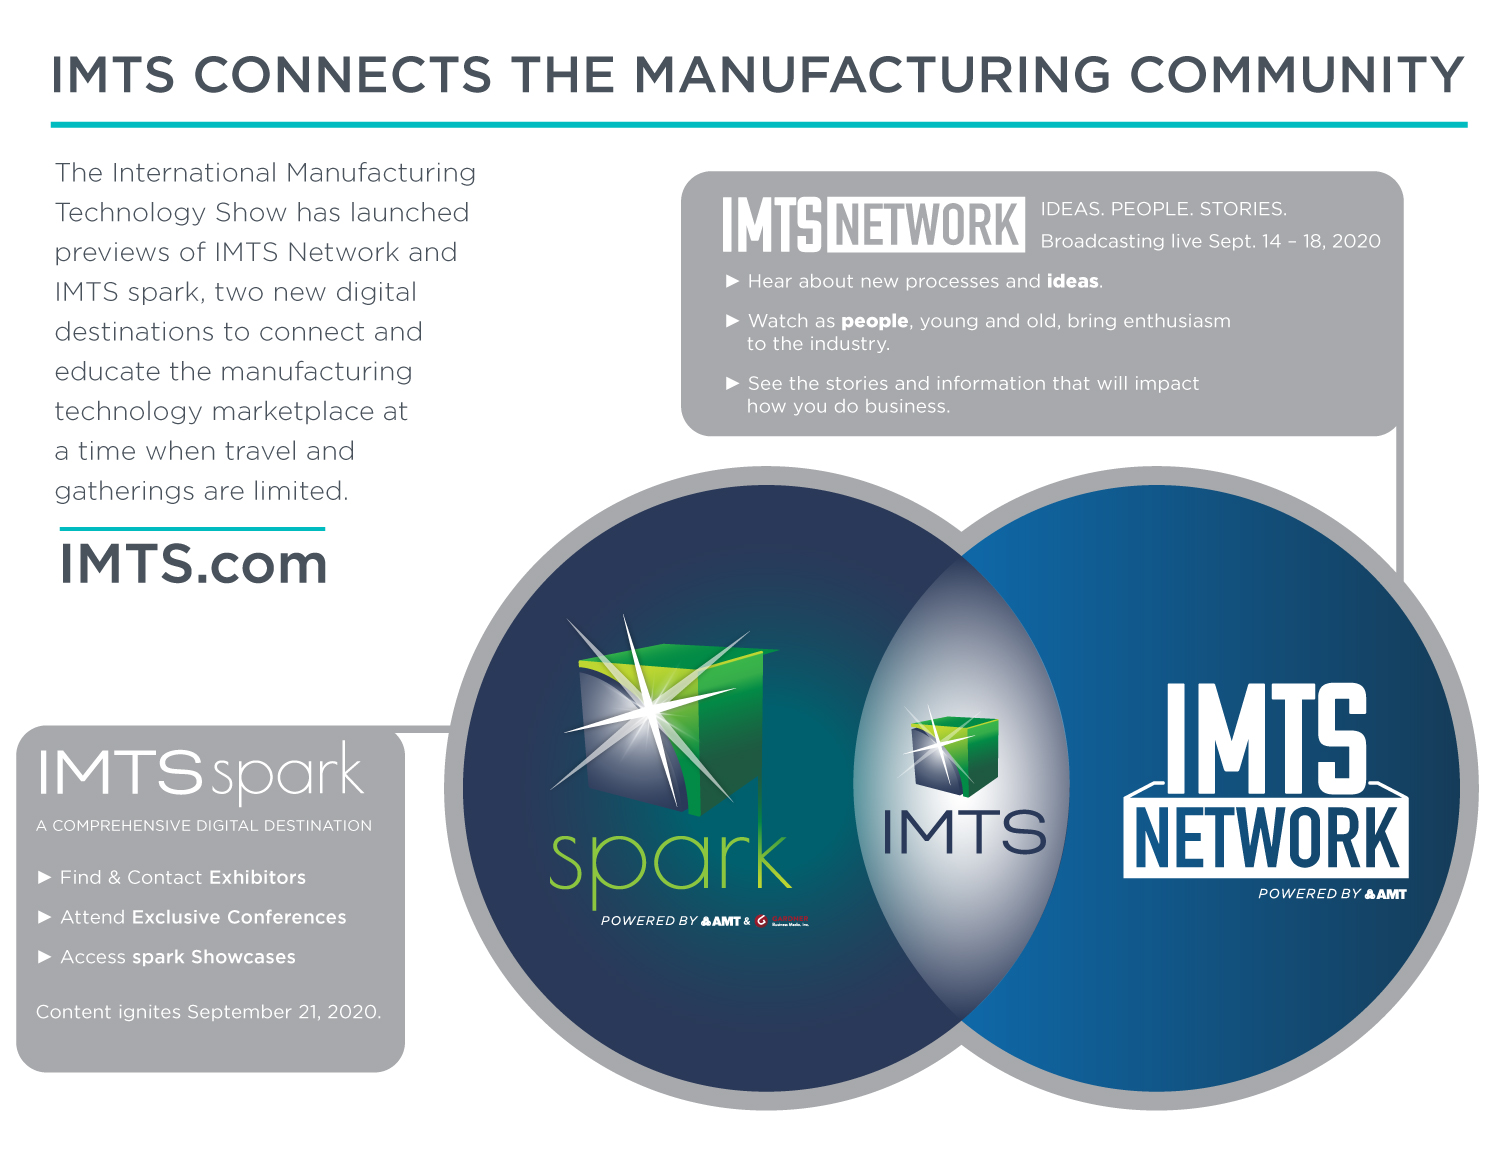 IMTS Connects the Manufacturing Community Through IMTS Network and IMTS Spark Digital Destinations